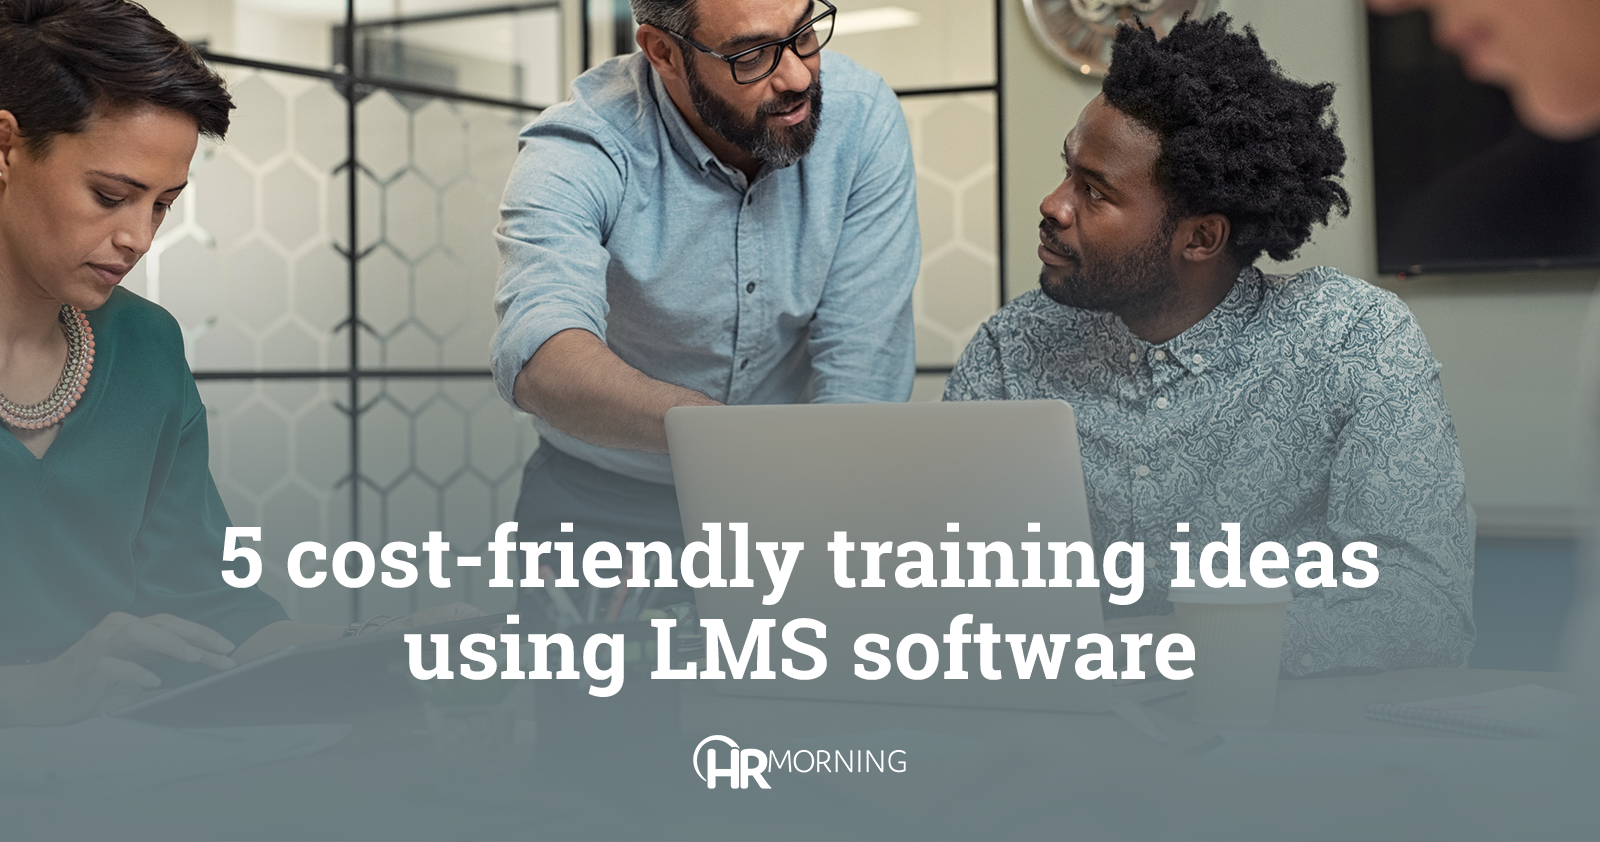 5 cost-friendly training ideas using LMS software